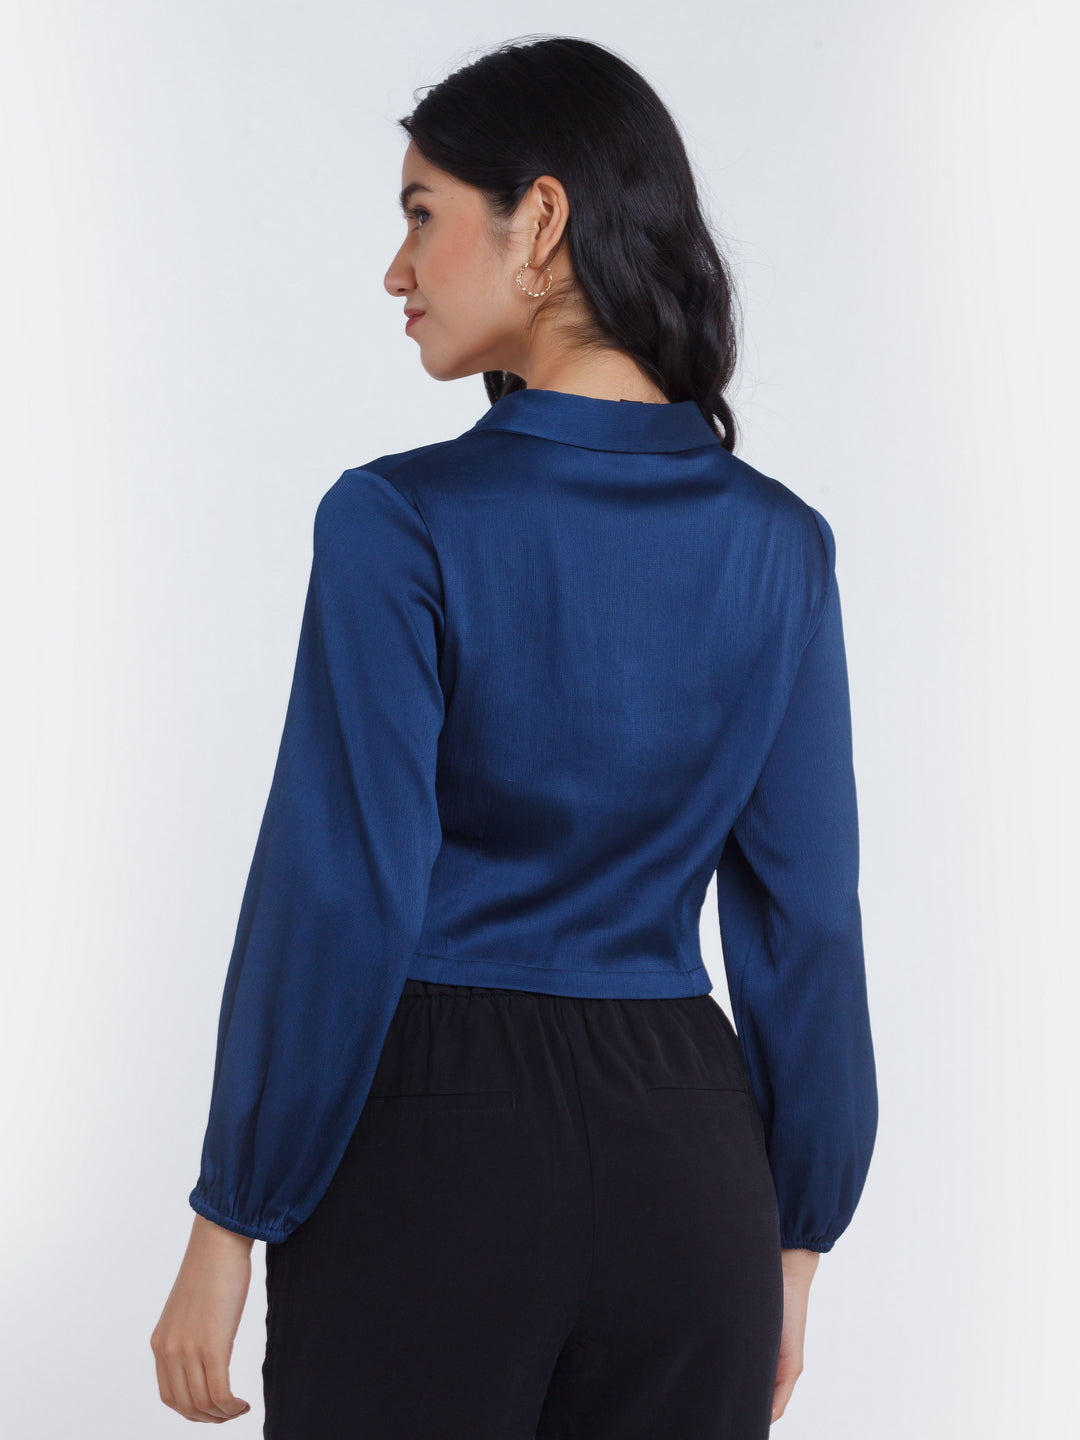 Navy Blue Solid Ruched Crop Top For Women